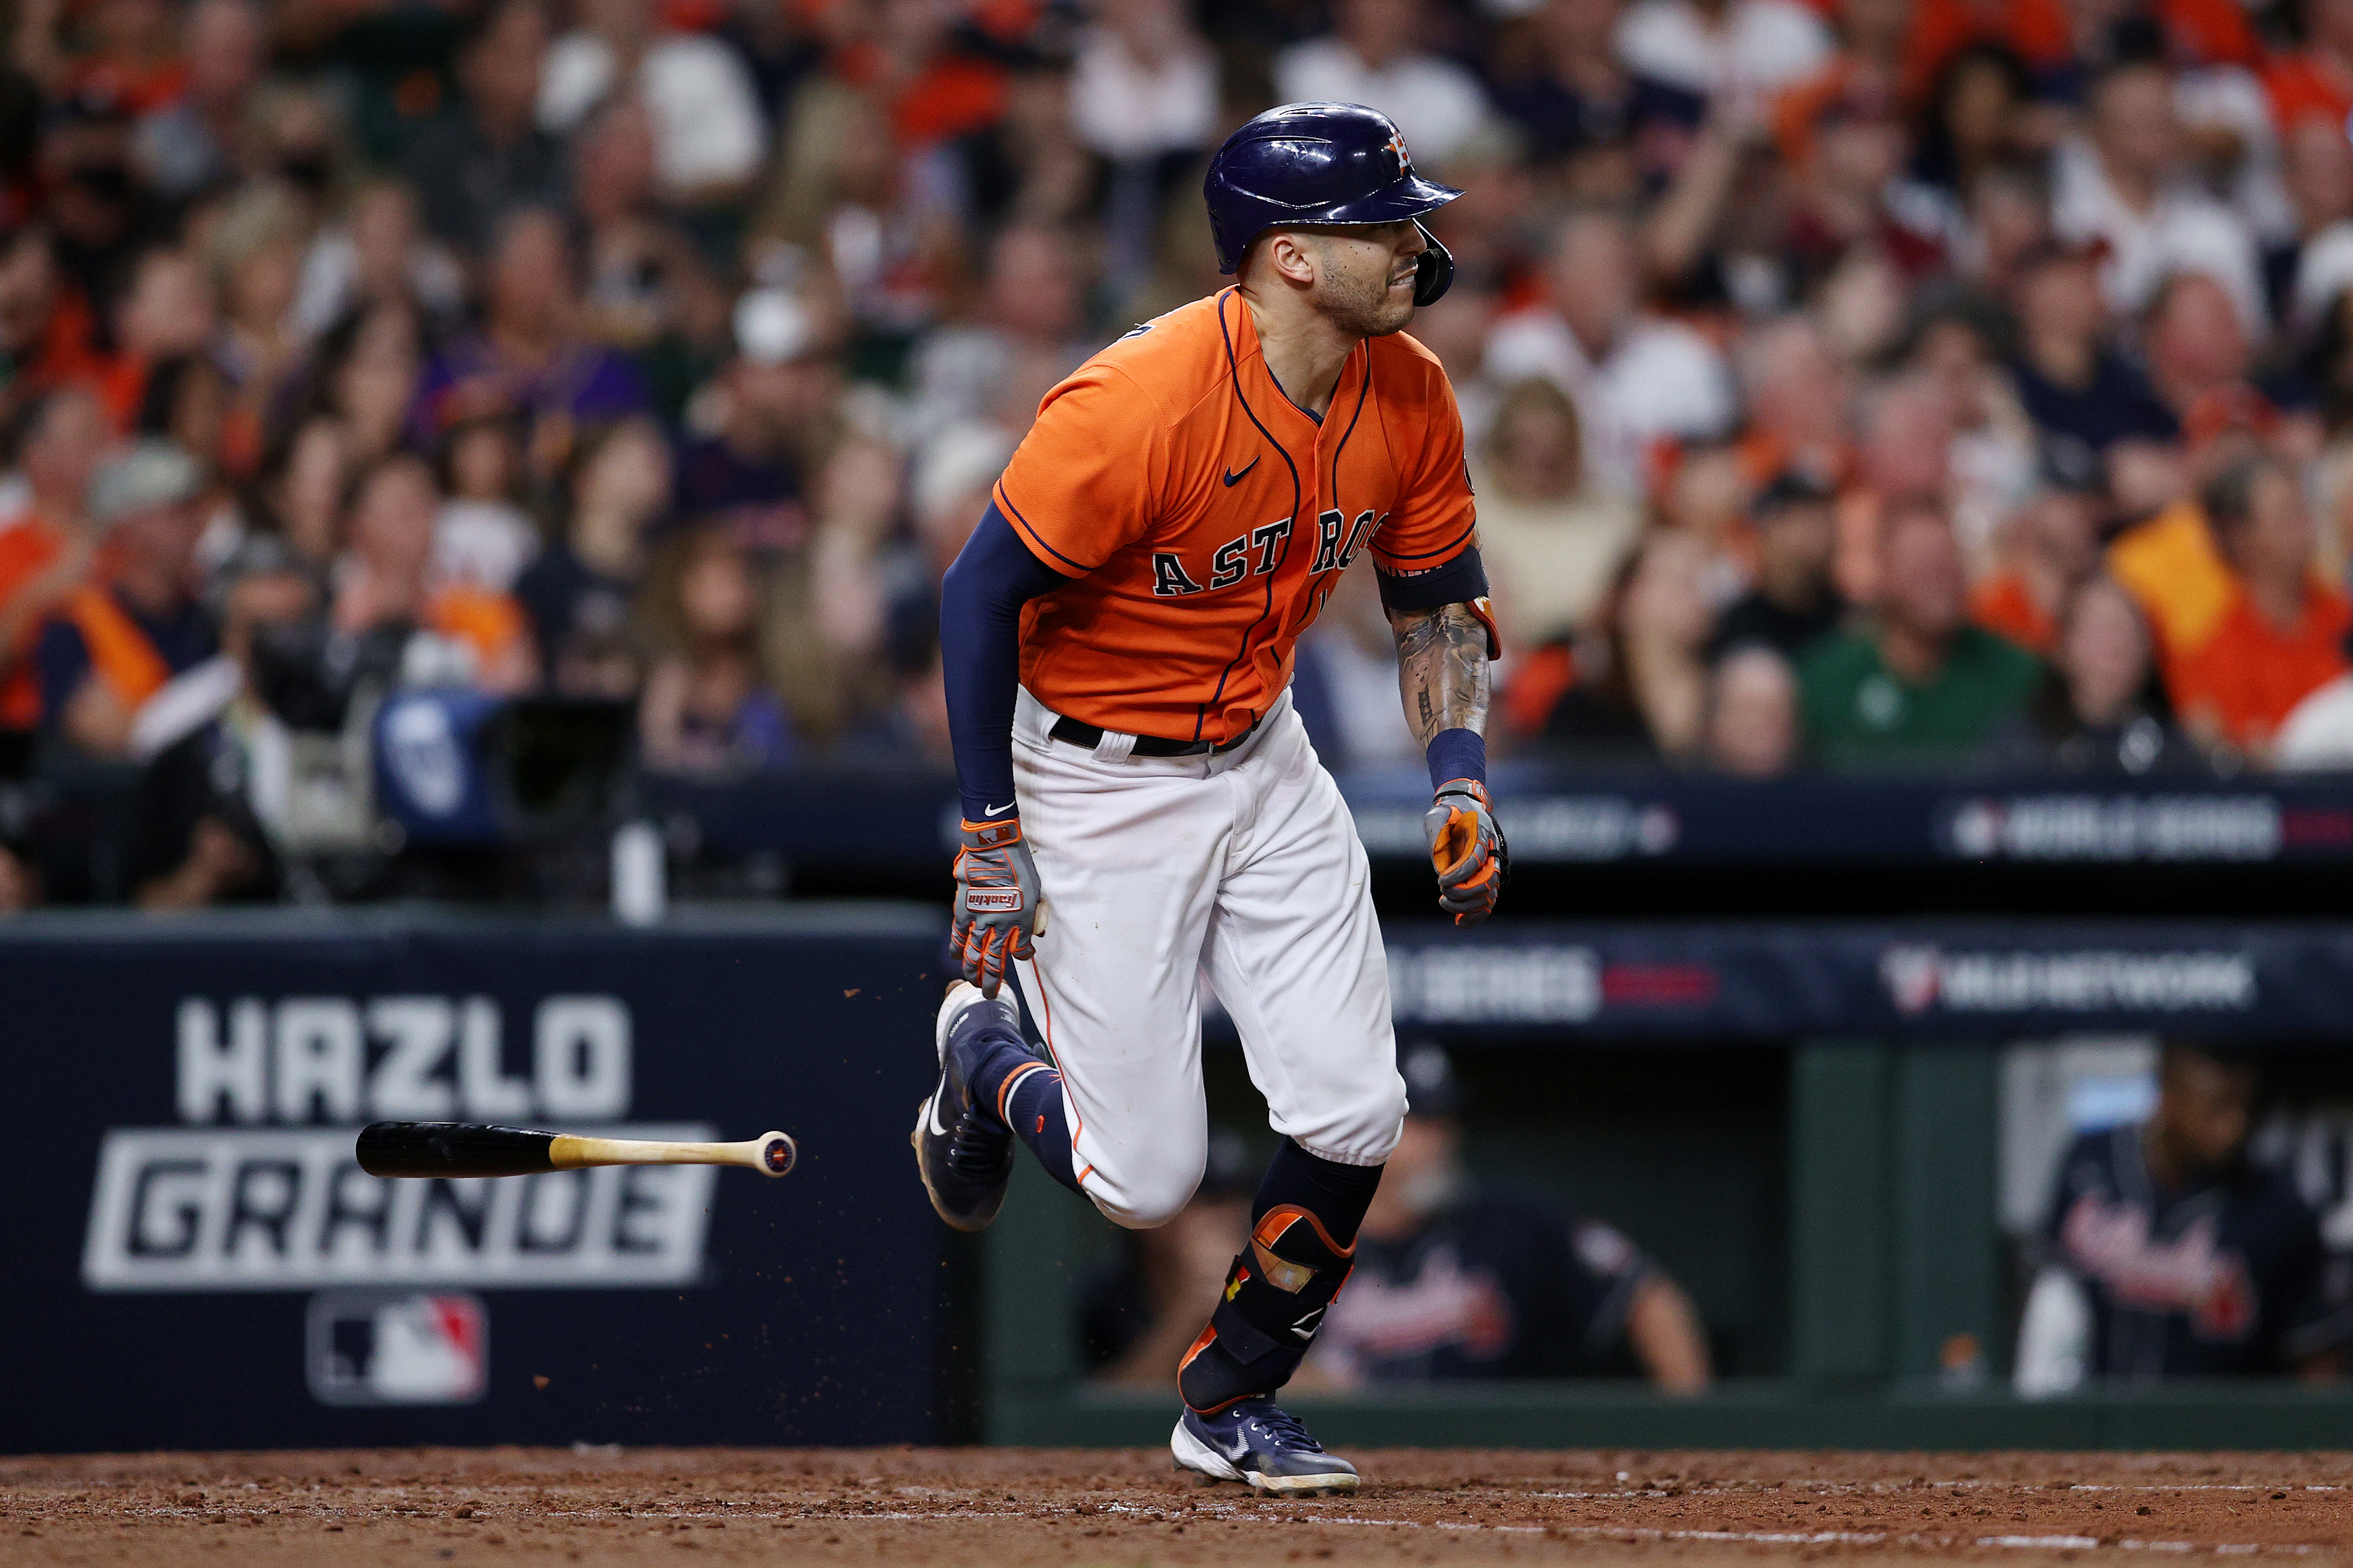 Carlos Correa #1 of the Houston Astros hits a single against the Atlanta Braves during the sixth inning in Game Two of the World Series at Minute Maid Park on October 27, 2021 in Houston, Texas.